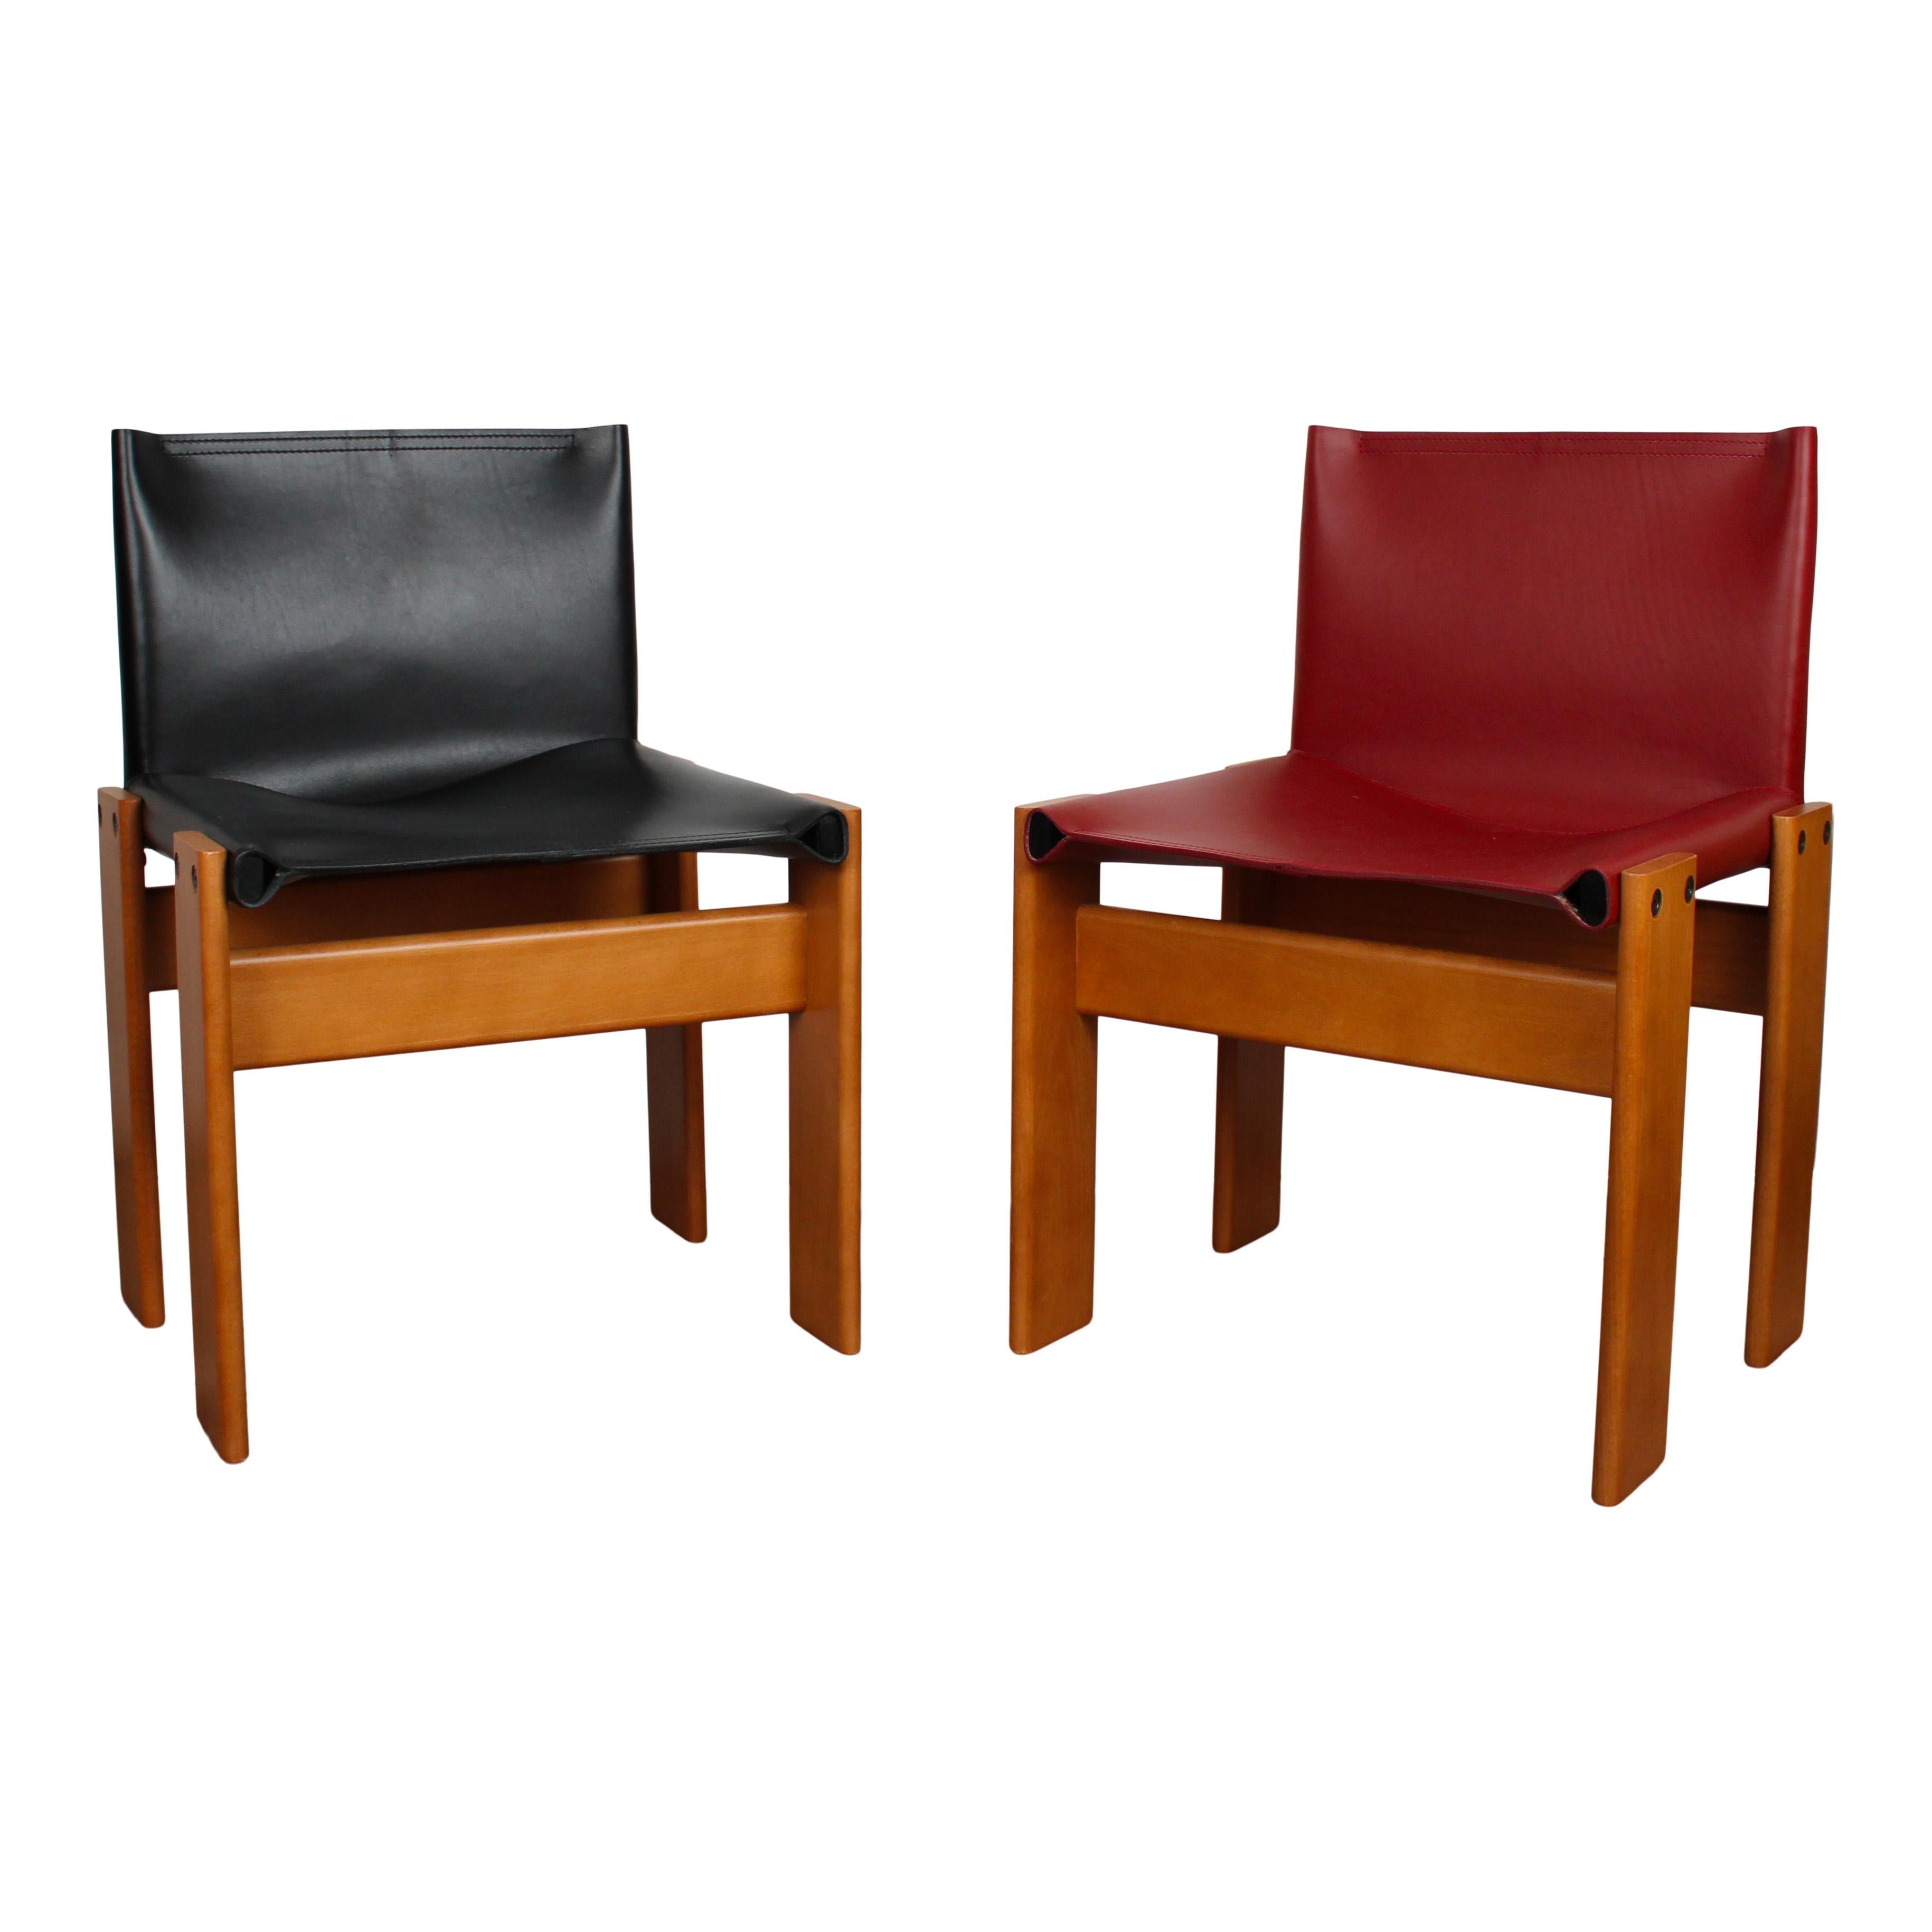 Afra & Tobia Scarpa Black & Red Leather Monk Dining Chair for Molteni, Set of 10 In Good Condition For Sale In Vicenza, IT